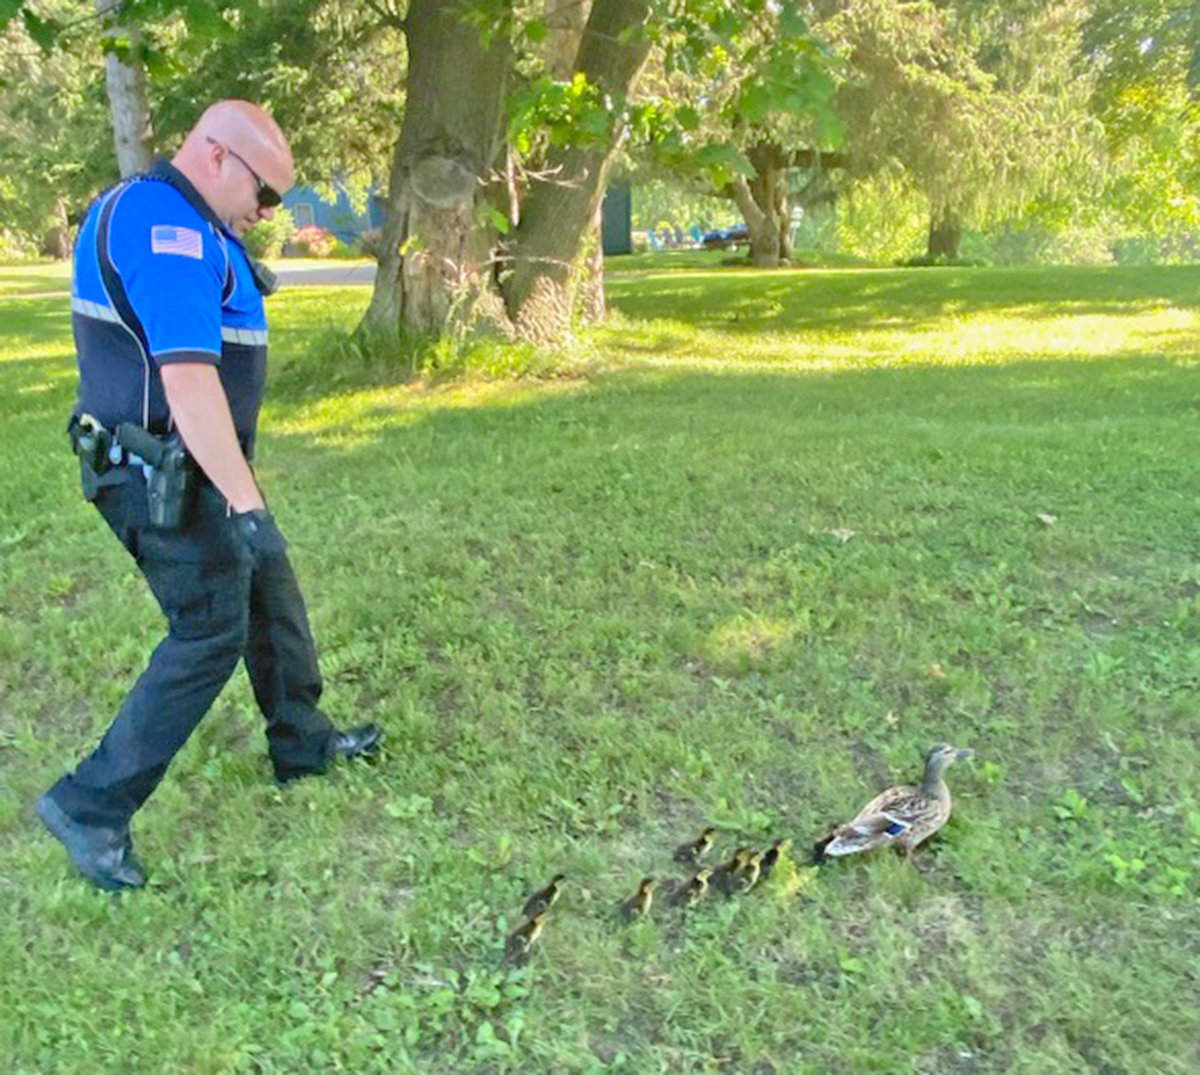 REUNITED FAMILY — Rome Police Officer Anthony A. Calandra escorts a family of ducks to safety after the babies were fished out of a sewer grate on East Chestnut Street Sunday morning. Authorities said the mother duck was happy to have her babies back.